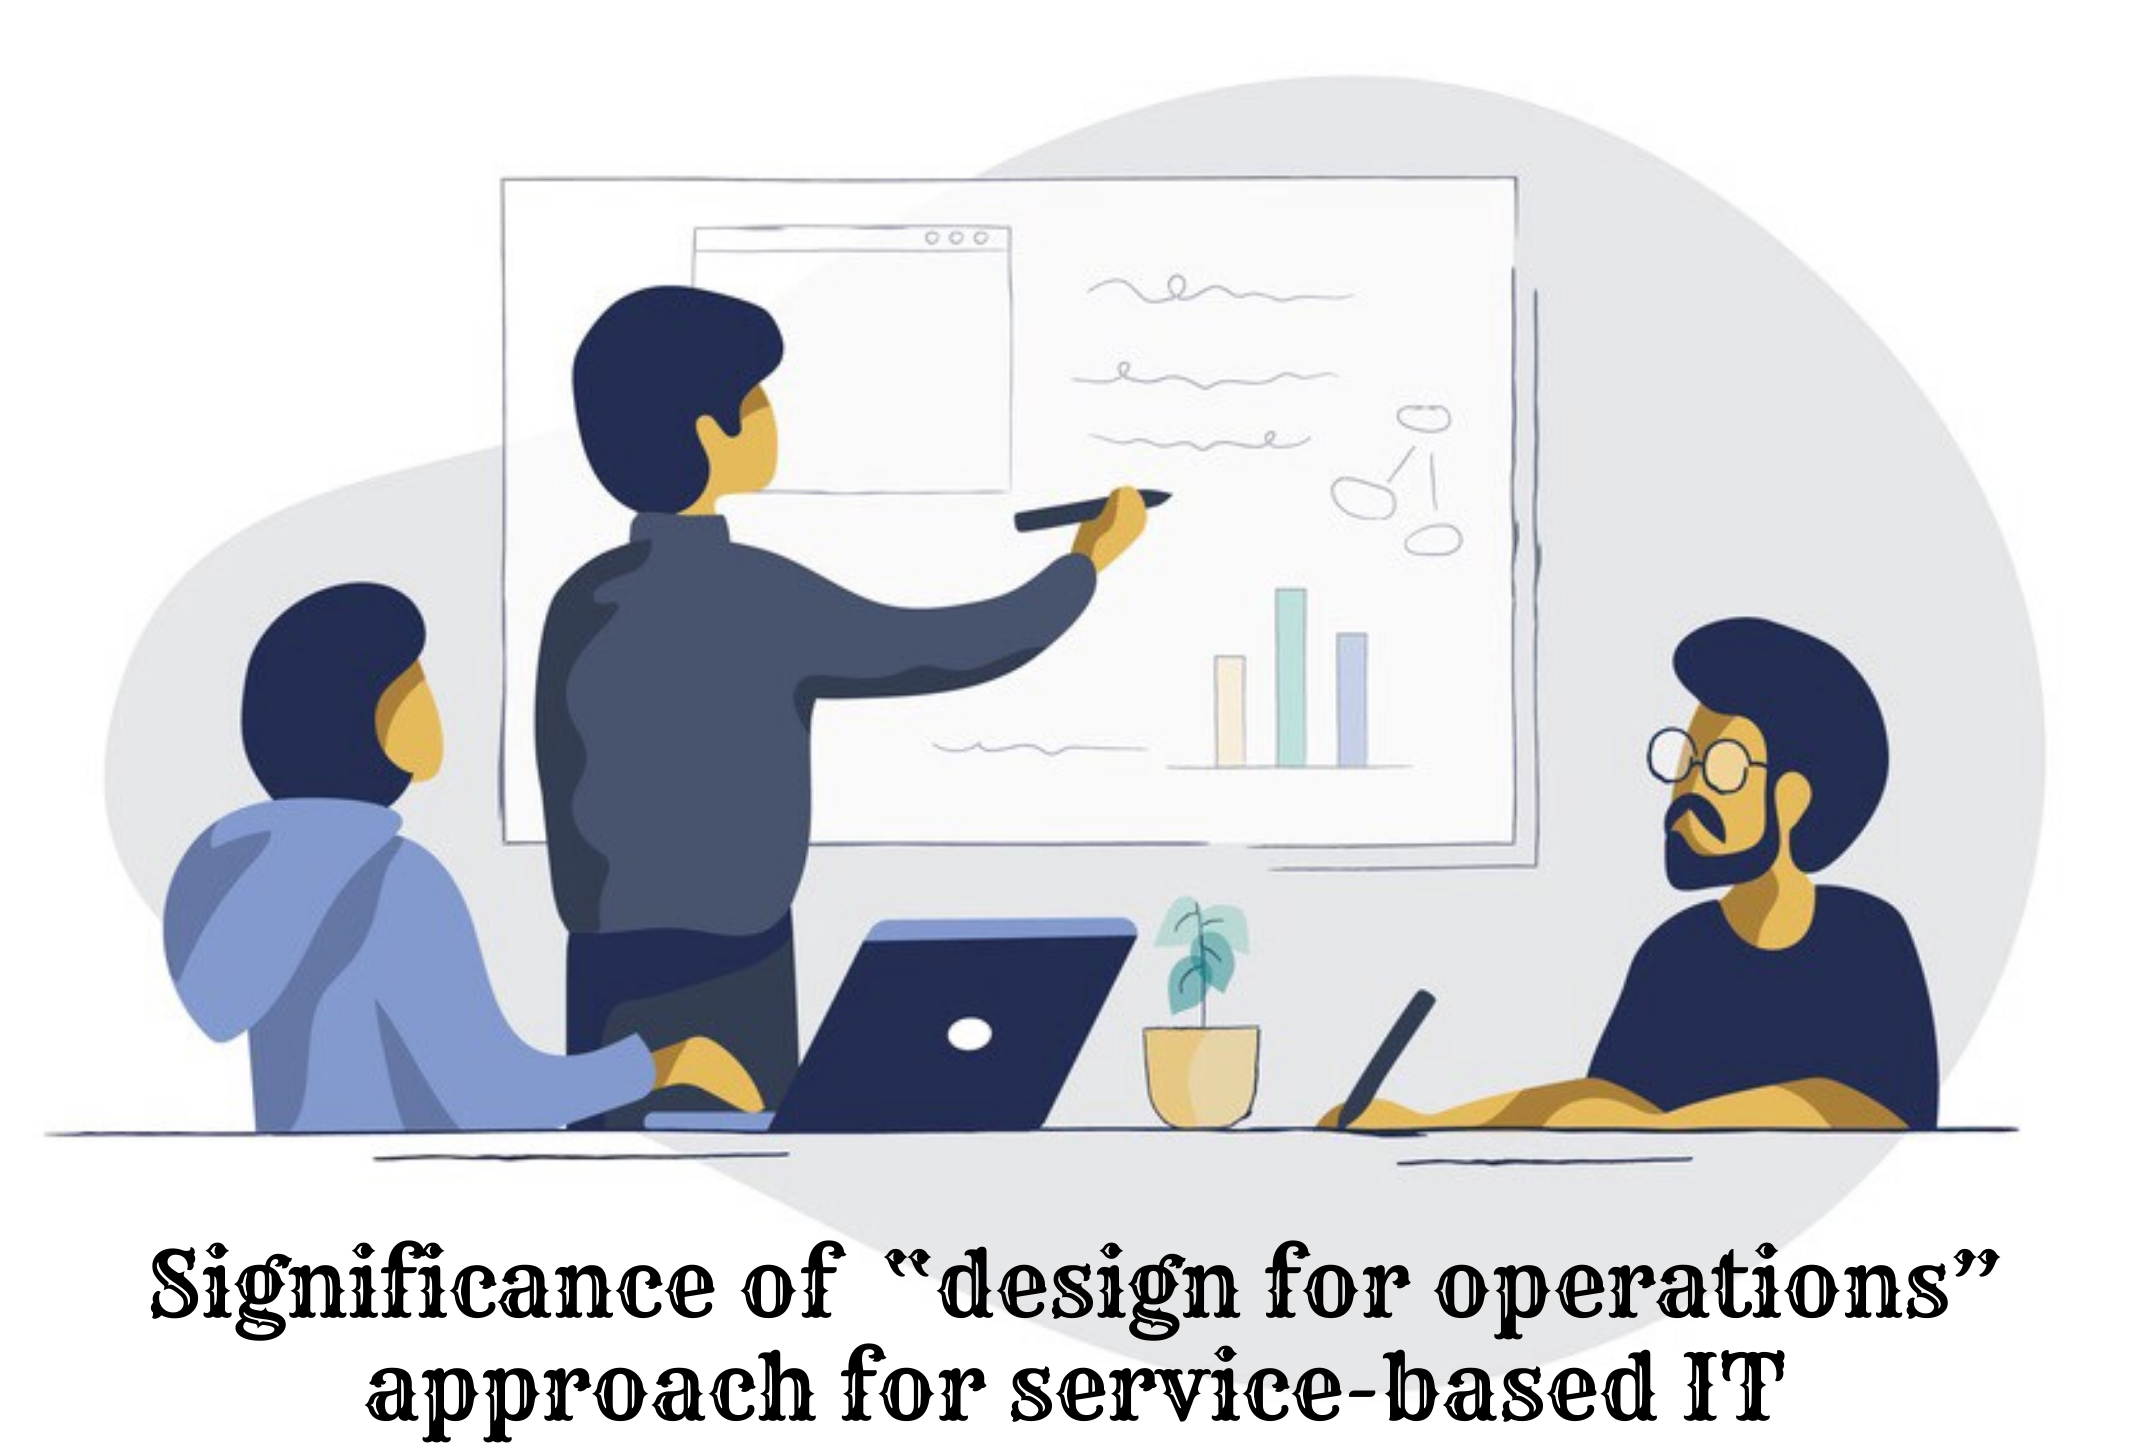 Significance of  “design for operations” approach for service-based IT